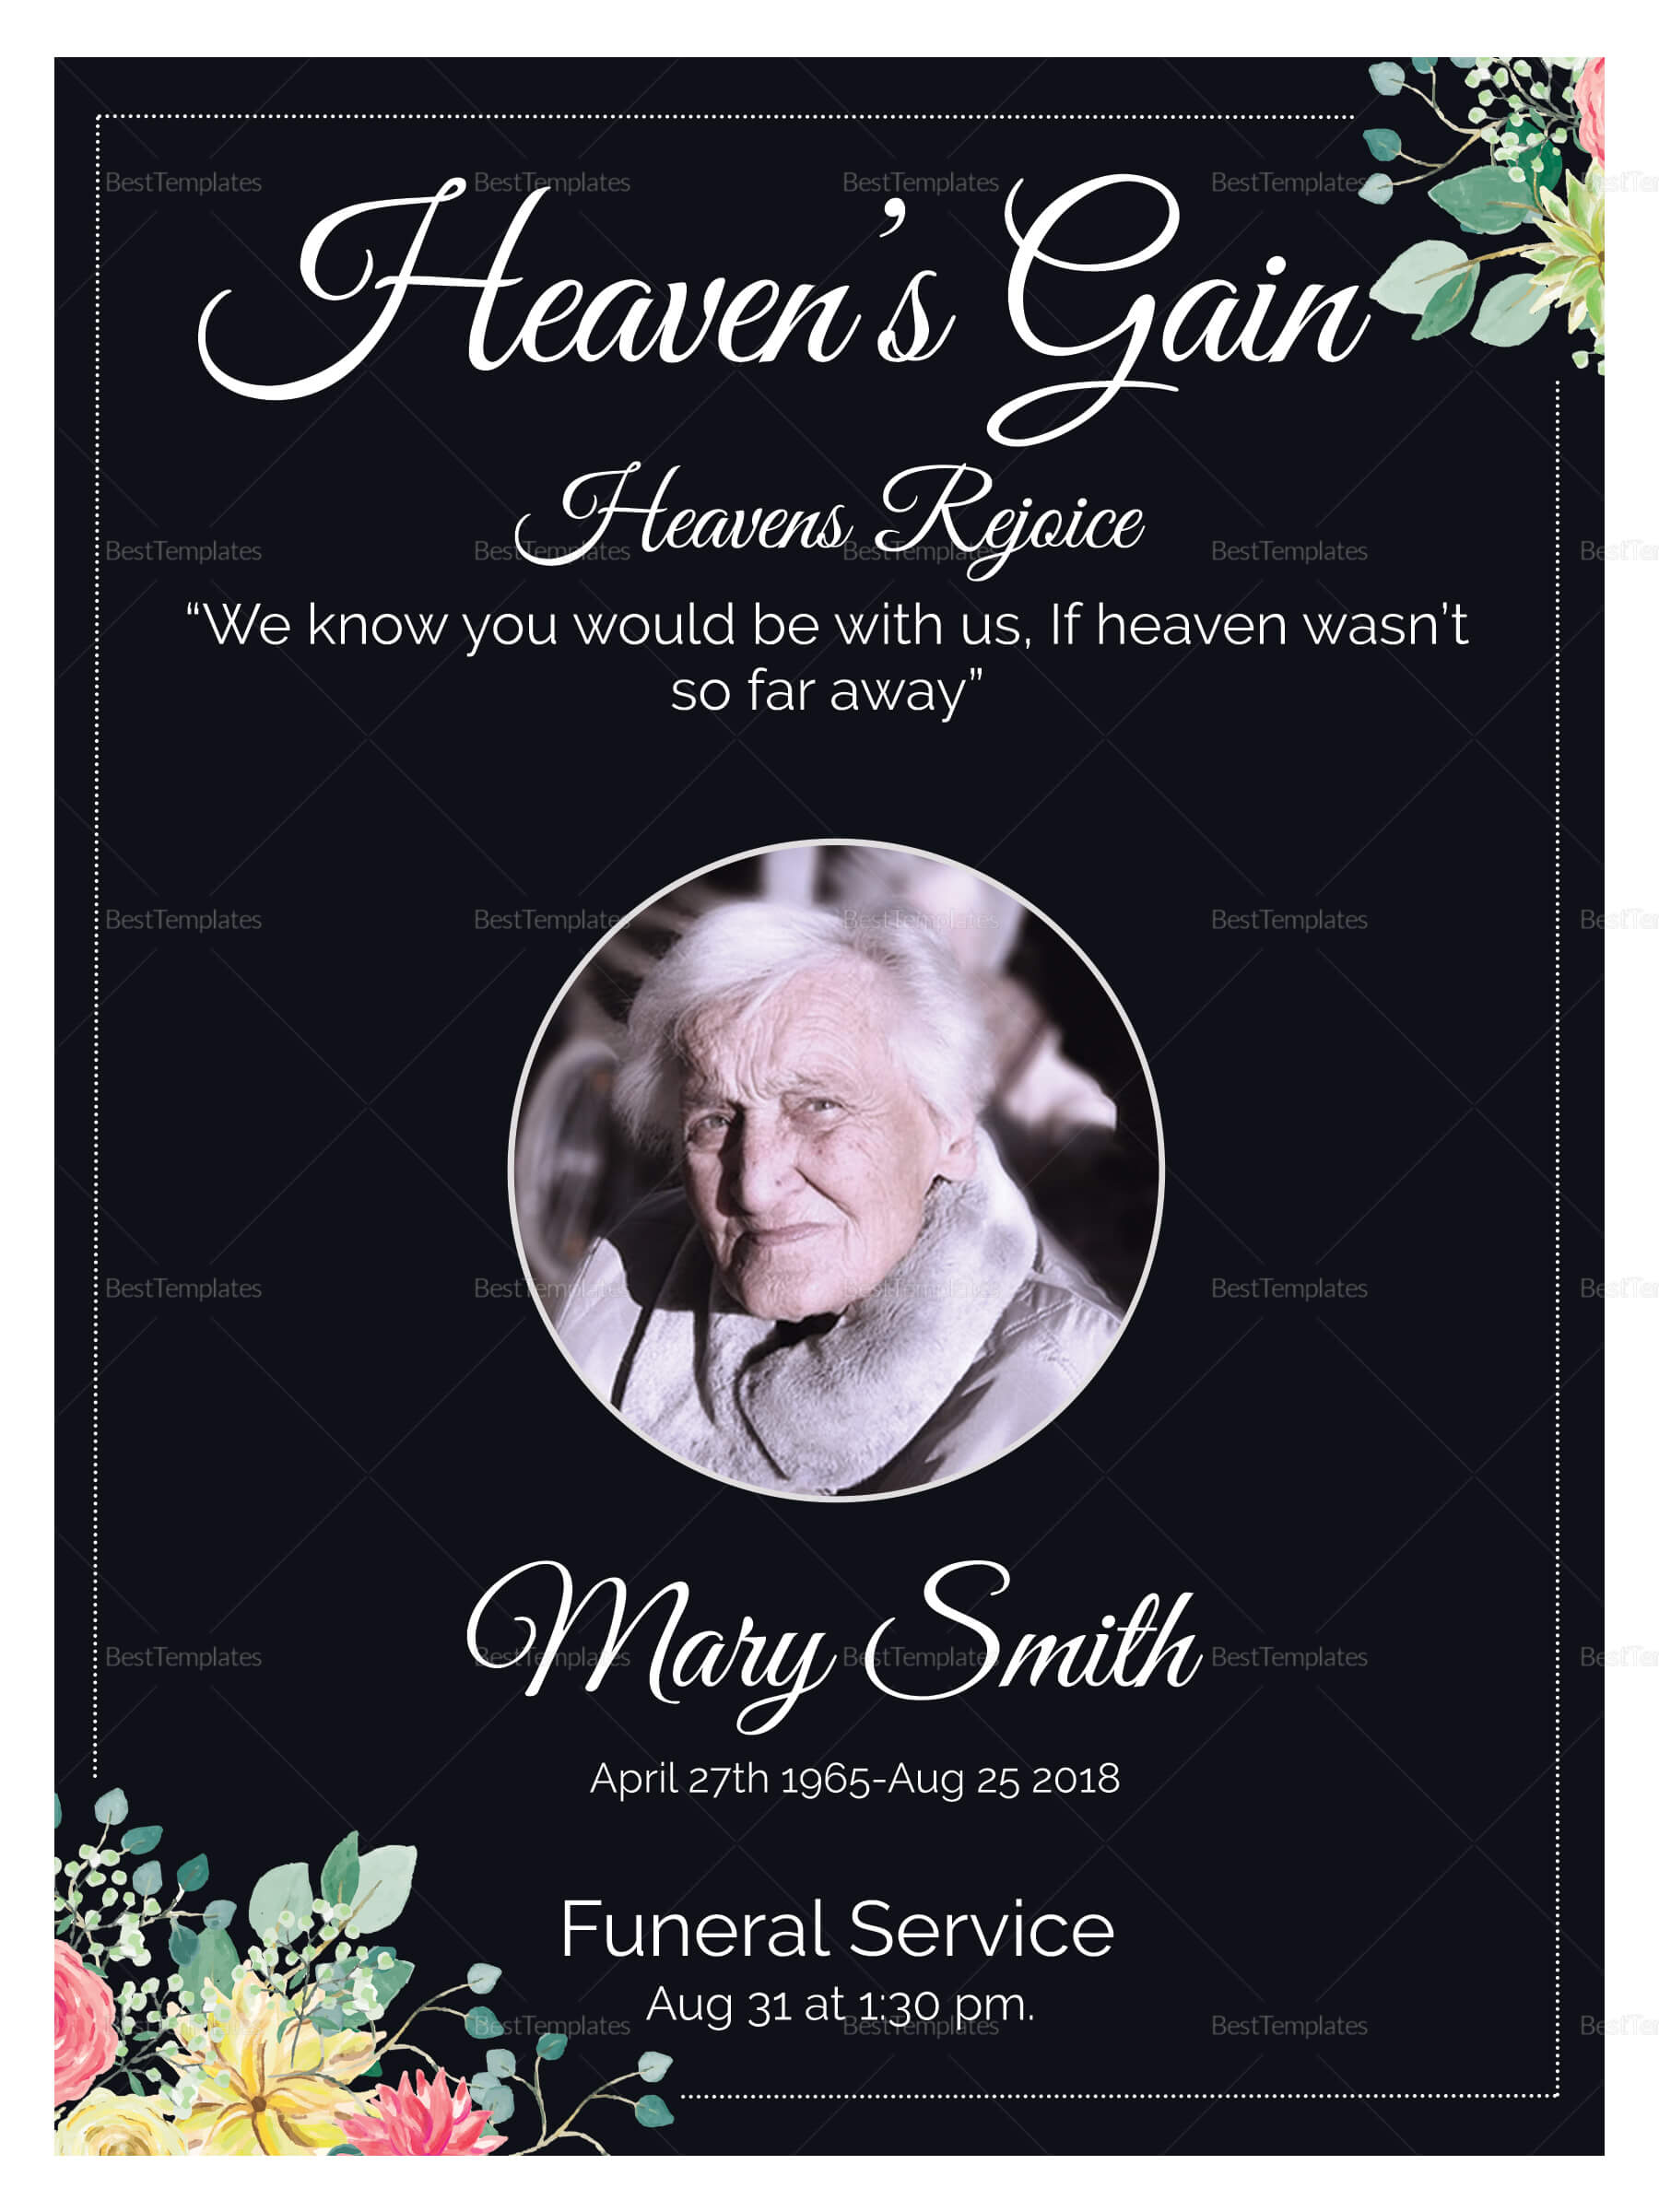 Eulogy Funeral Invitation Card Template With Regard To Funeral Invitation Card Template